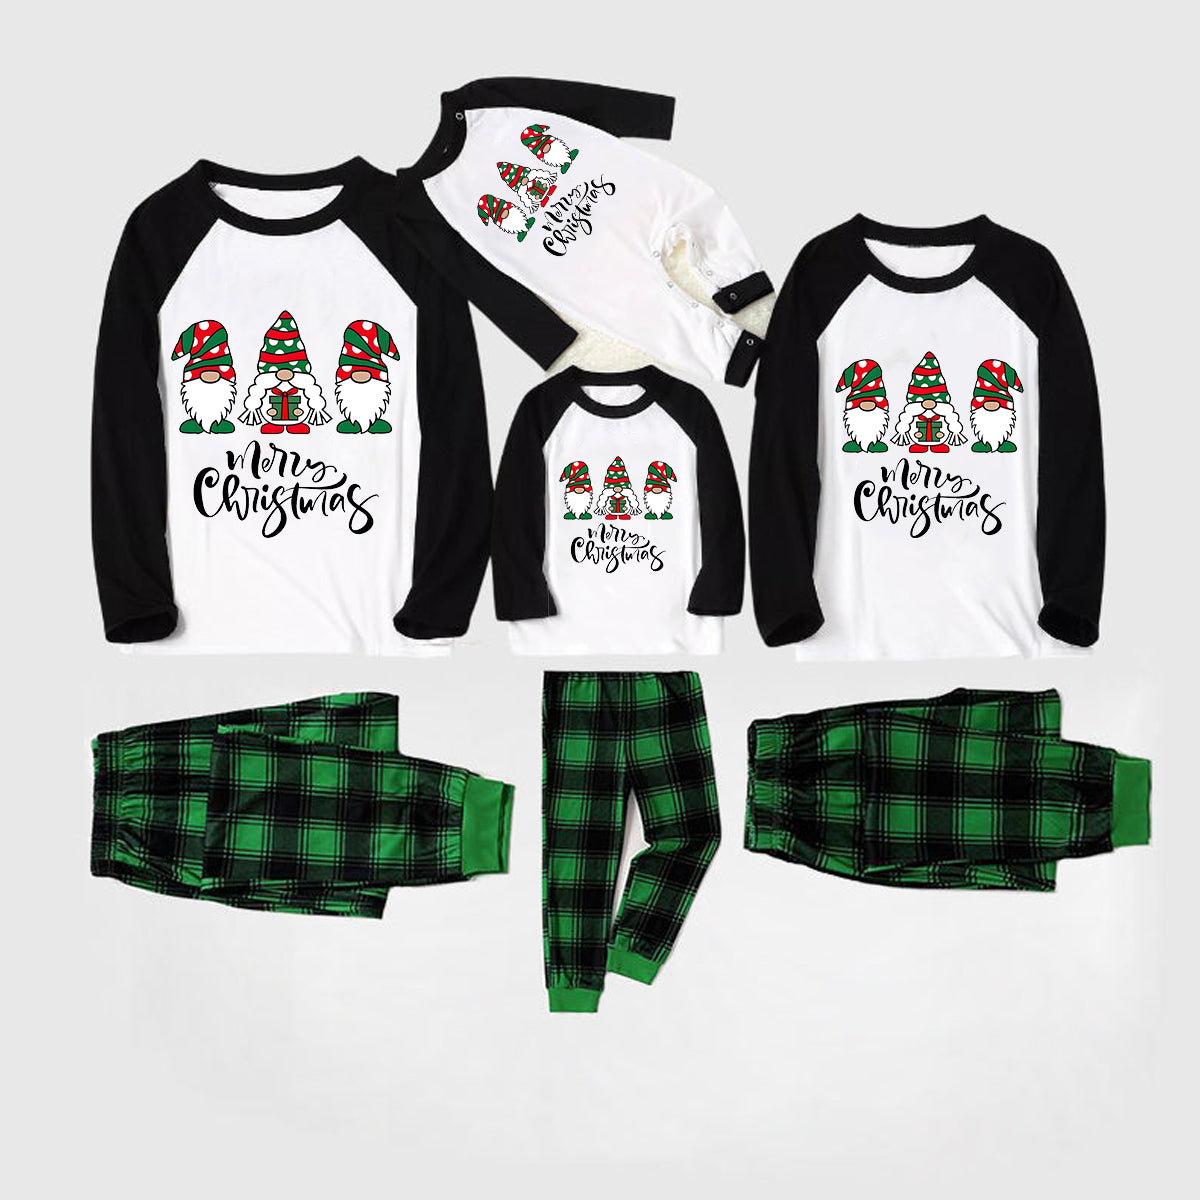 Merry Christmas Cute Gnome Print Casual Long Sleeve Sweatshirts Casual Long Sleeve Sweatshirts Black Contrast Top and Black and Green Plaid Pants Family Matching Pajamas Sets With Dog Bandana